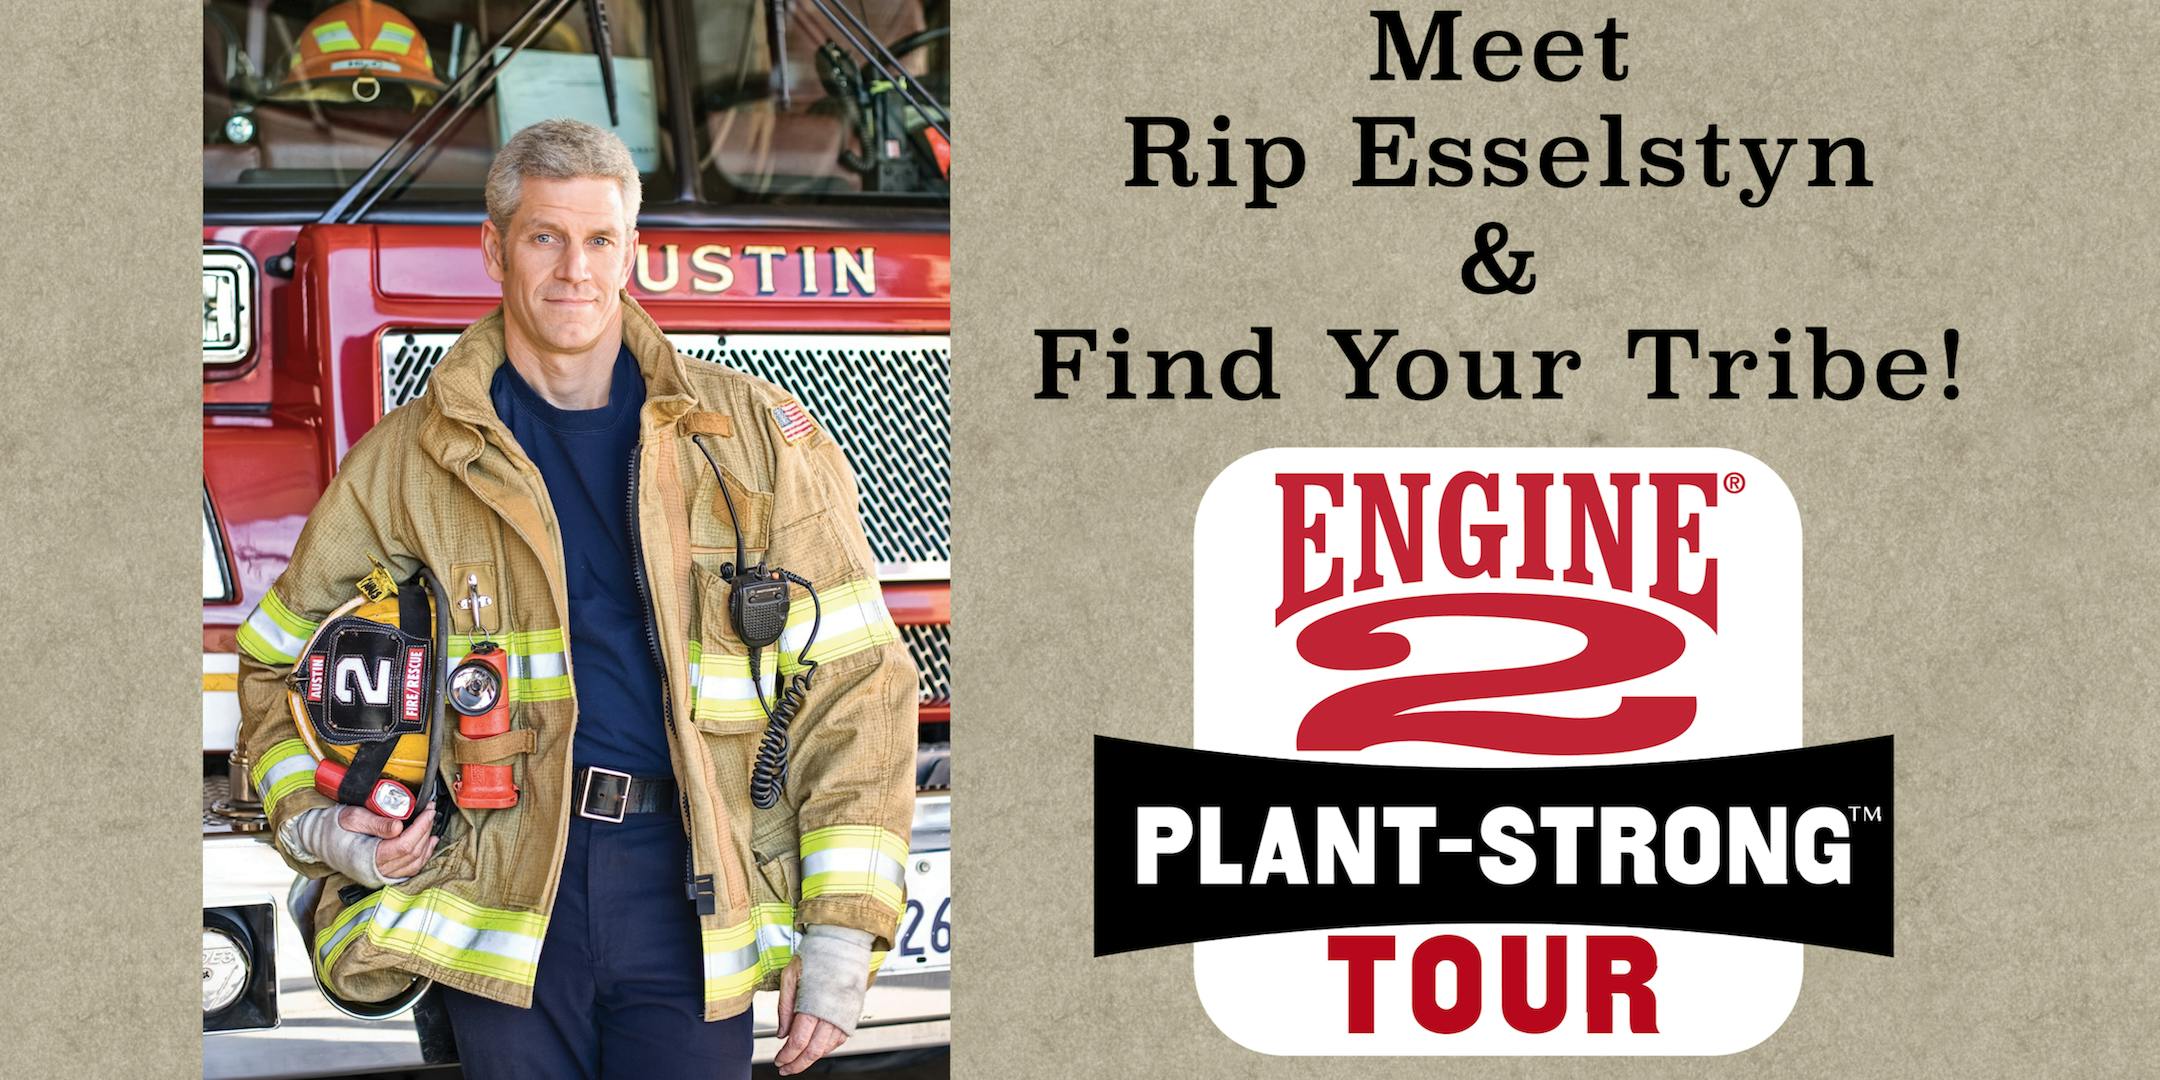 Engine 2 Plant-Strong Tour